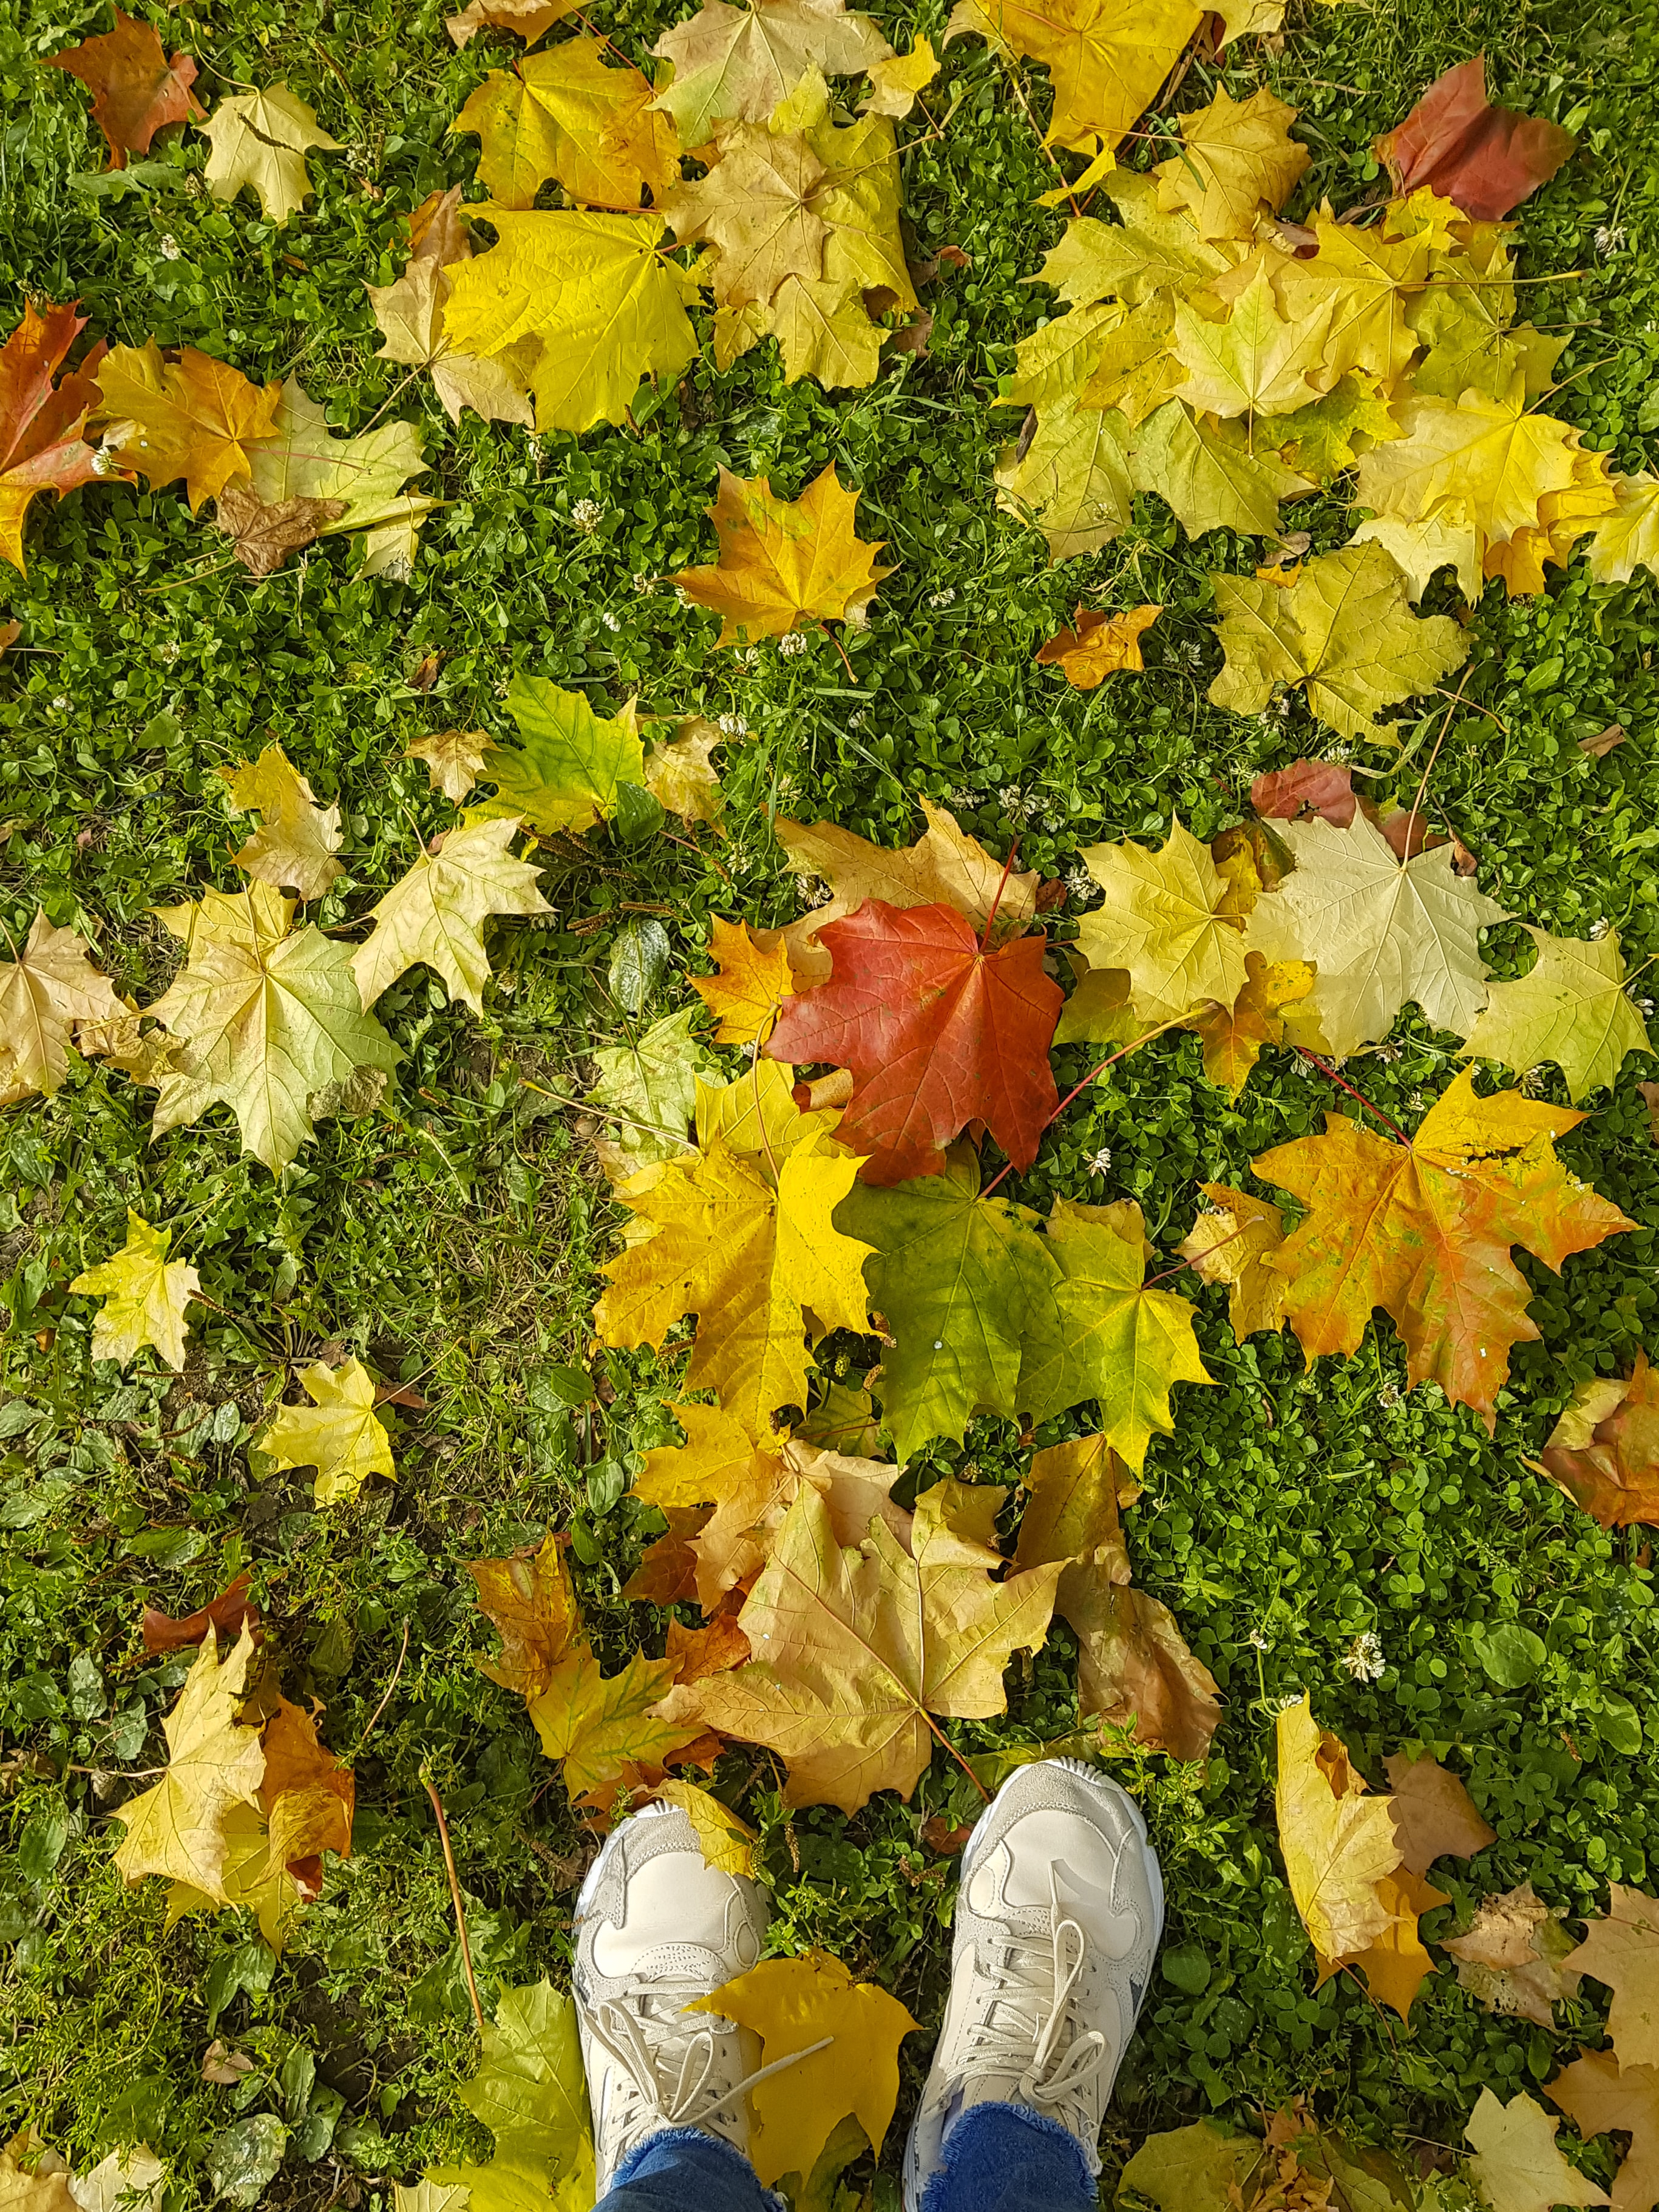 wallpapers legs, grass, autumn, leaves, miscellanea, miscellaneous, sneakers, maple